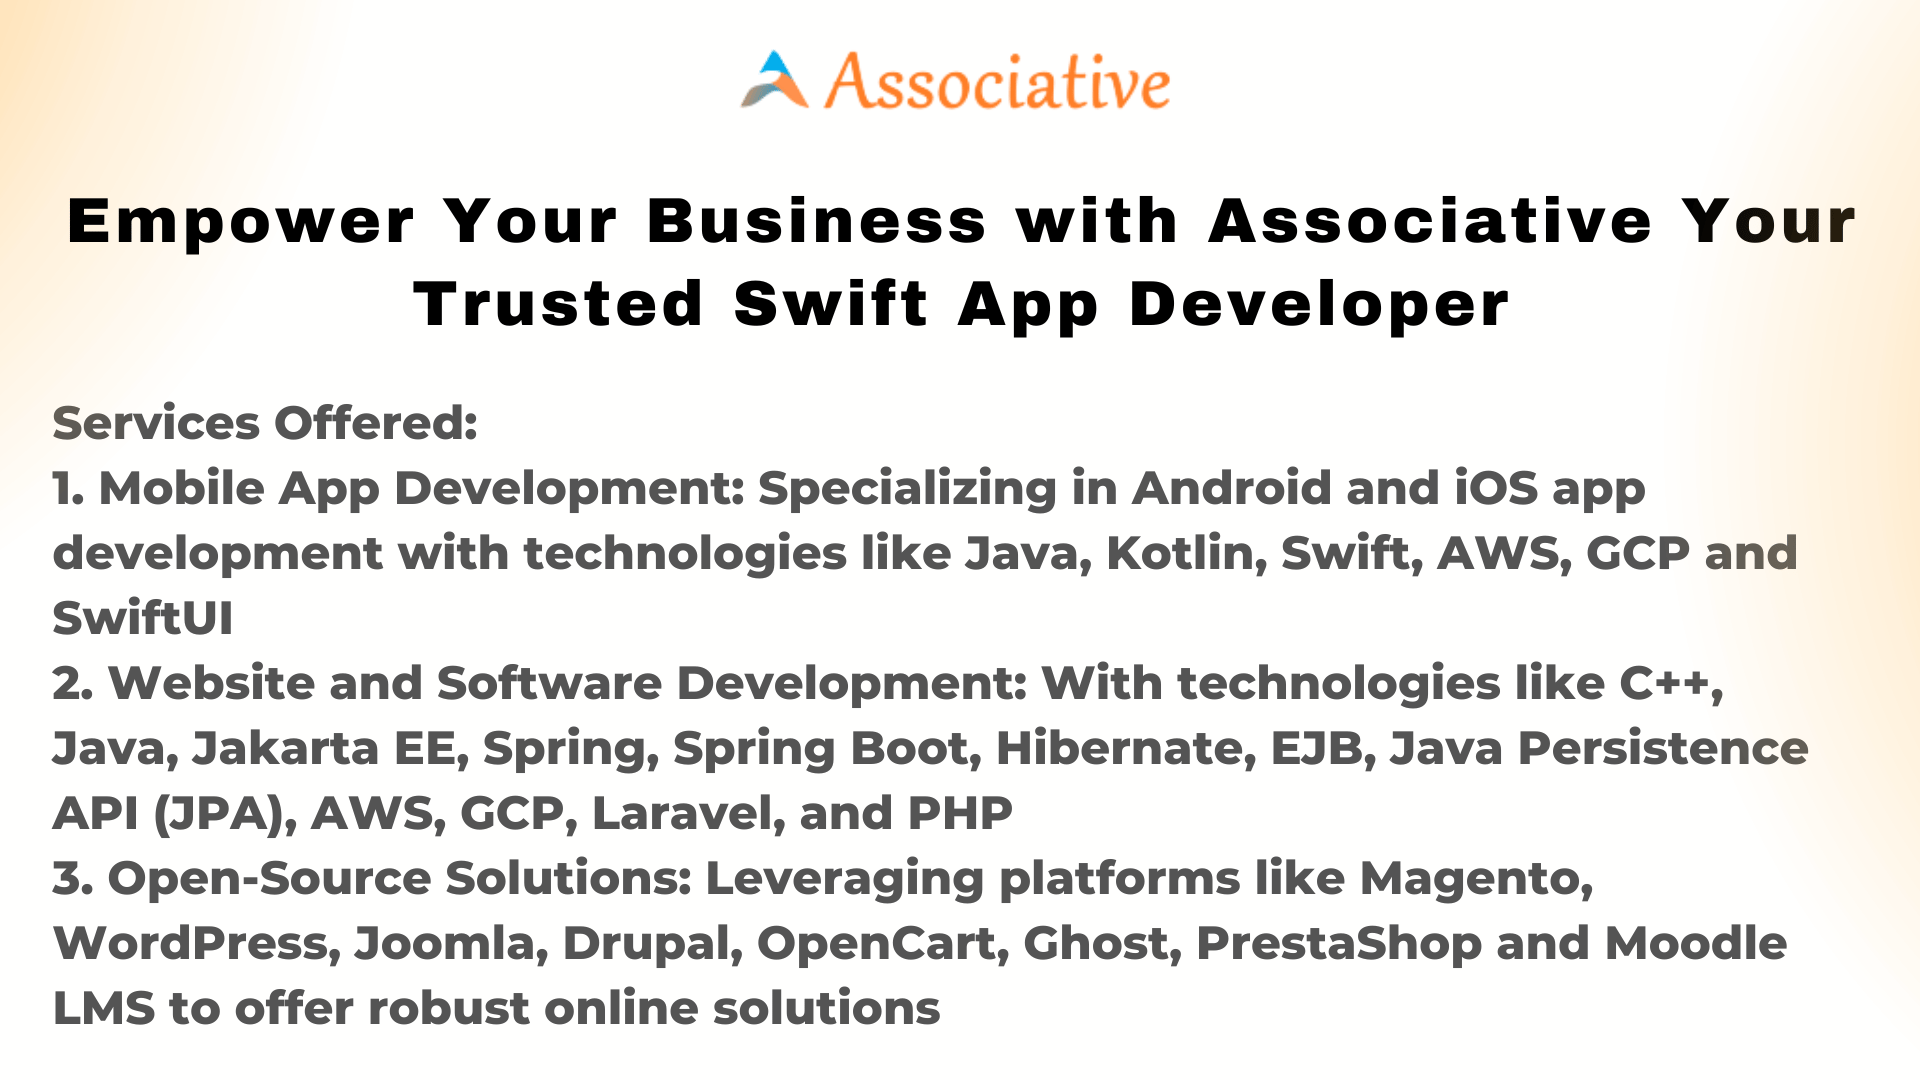 Empower Your Business with Associative Your Trusted Swift App Developer